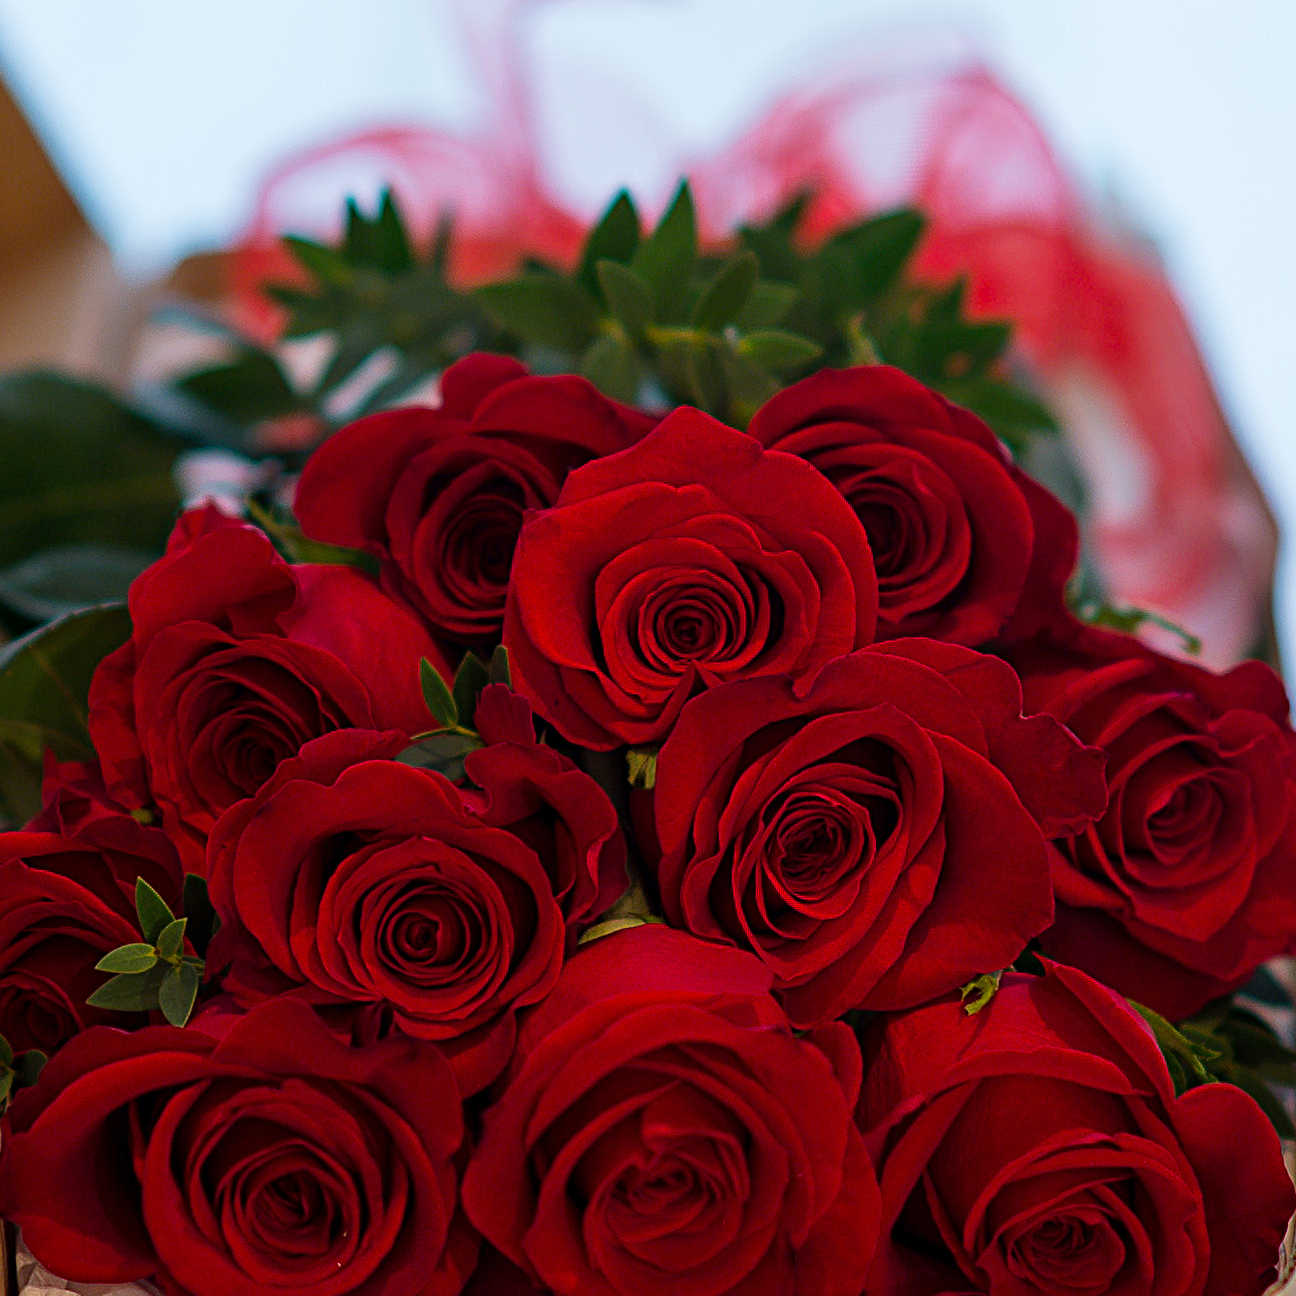 How to care for your valentine red roses in just 3 easy steps!